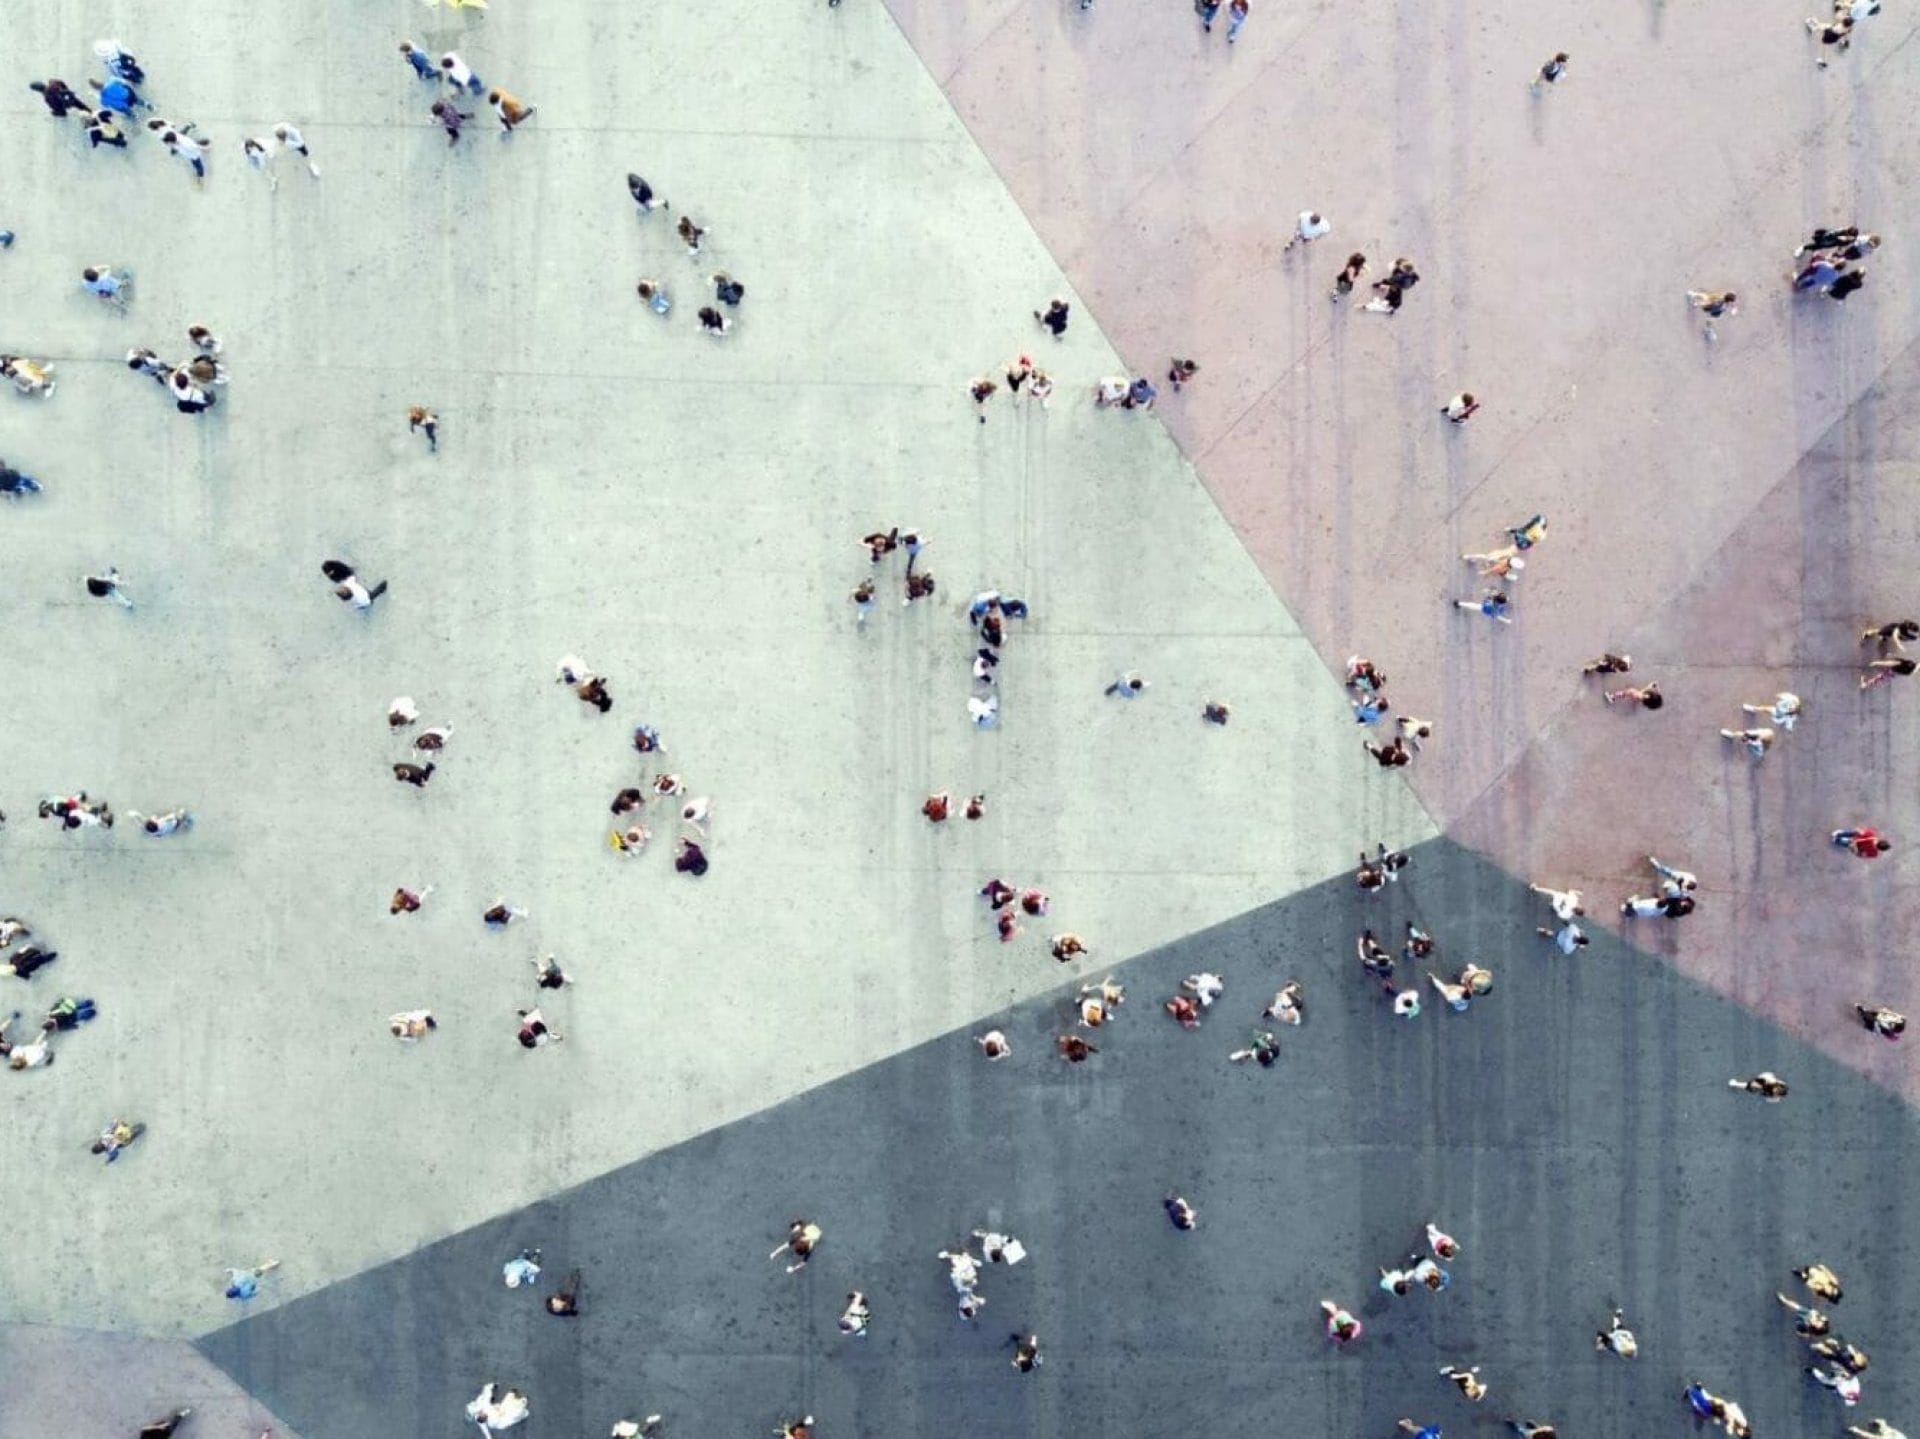 High Angle View Of People On Street